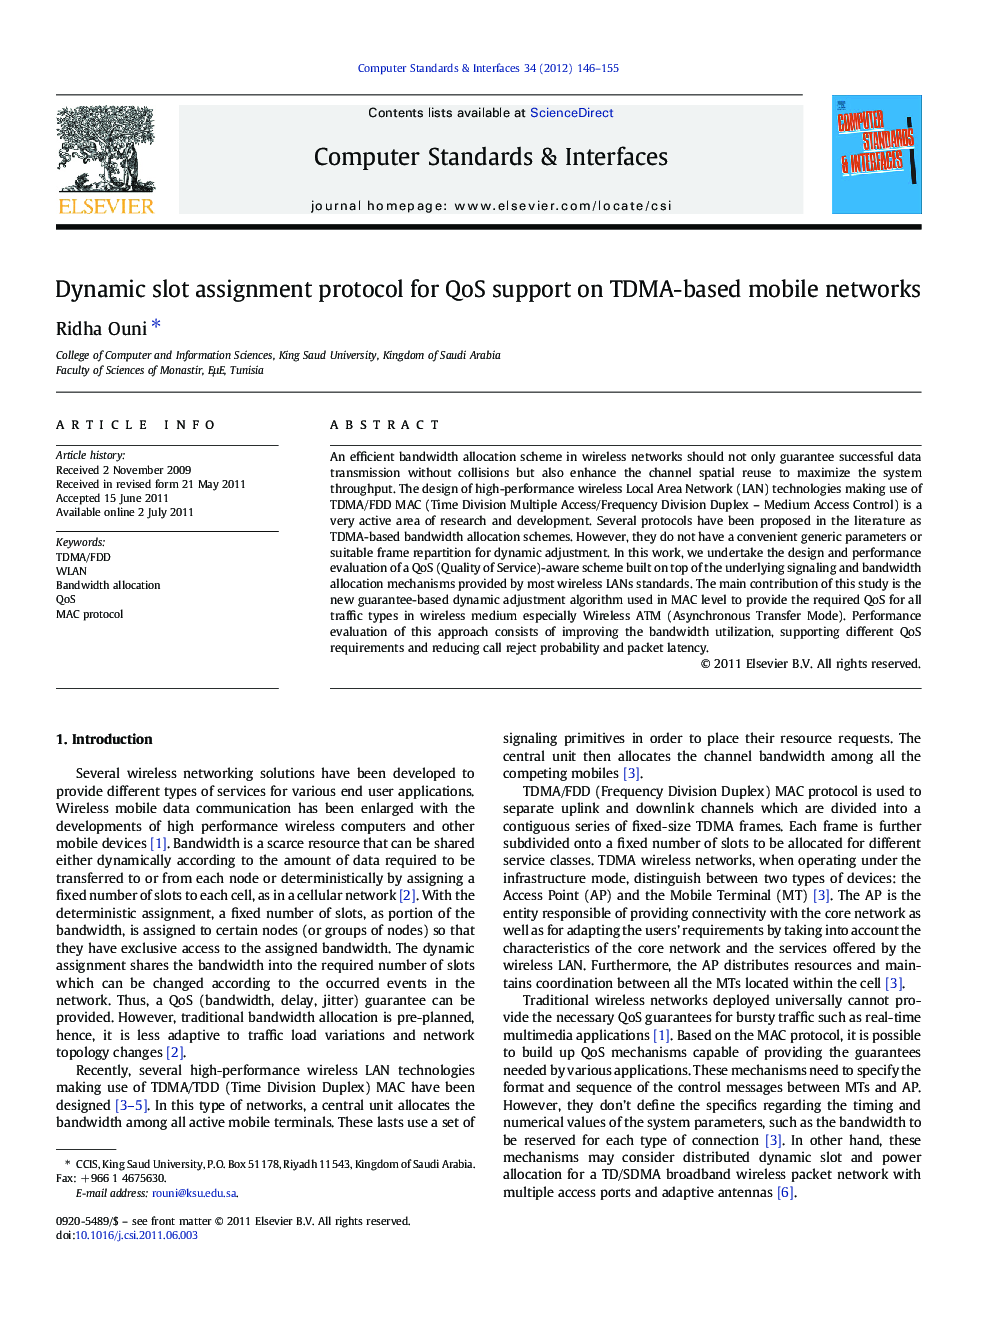 Dynamic slot assignment protocol for QoS support on TDMA-based mobile networks